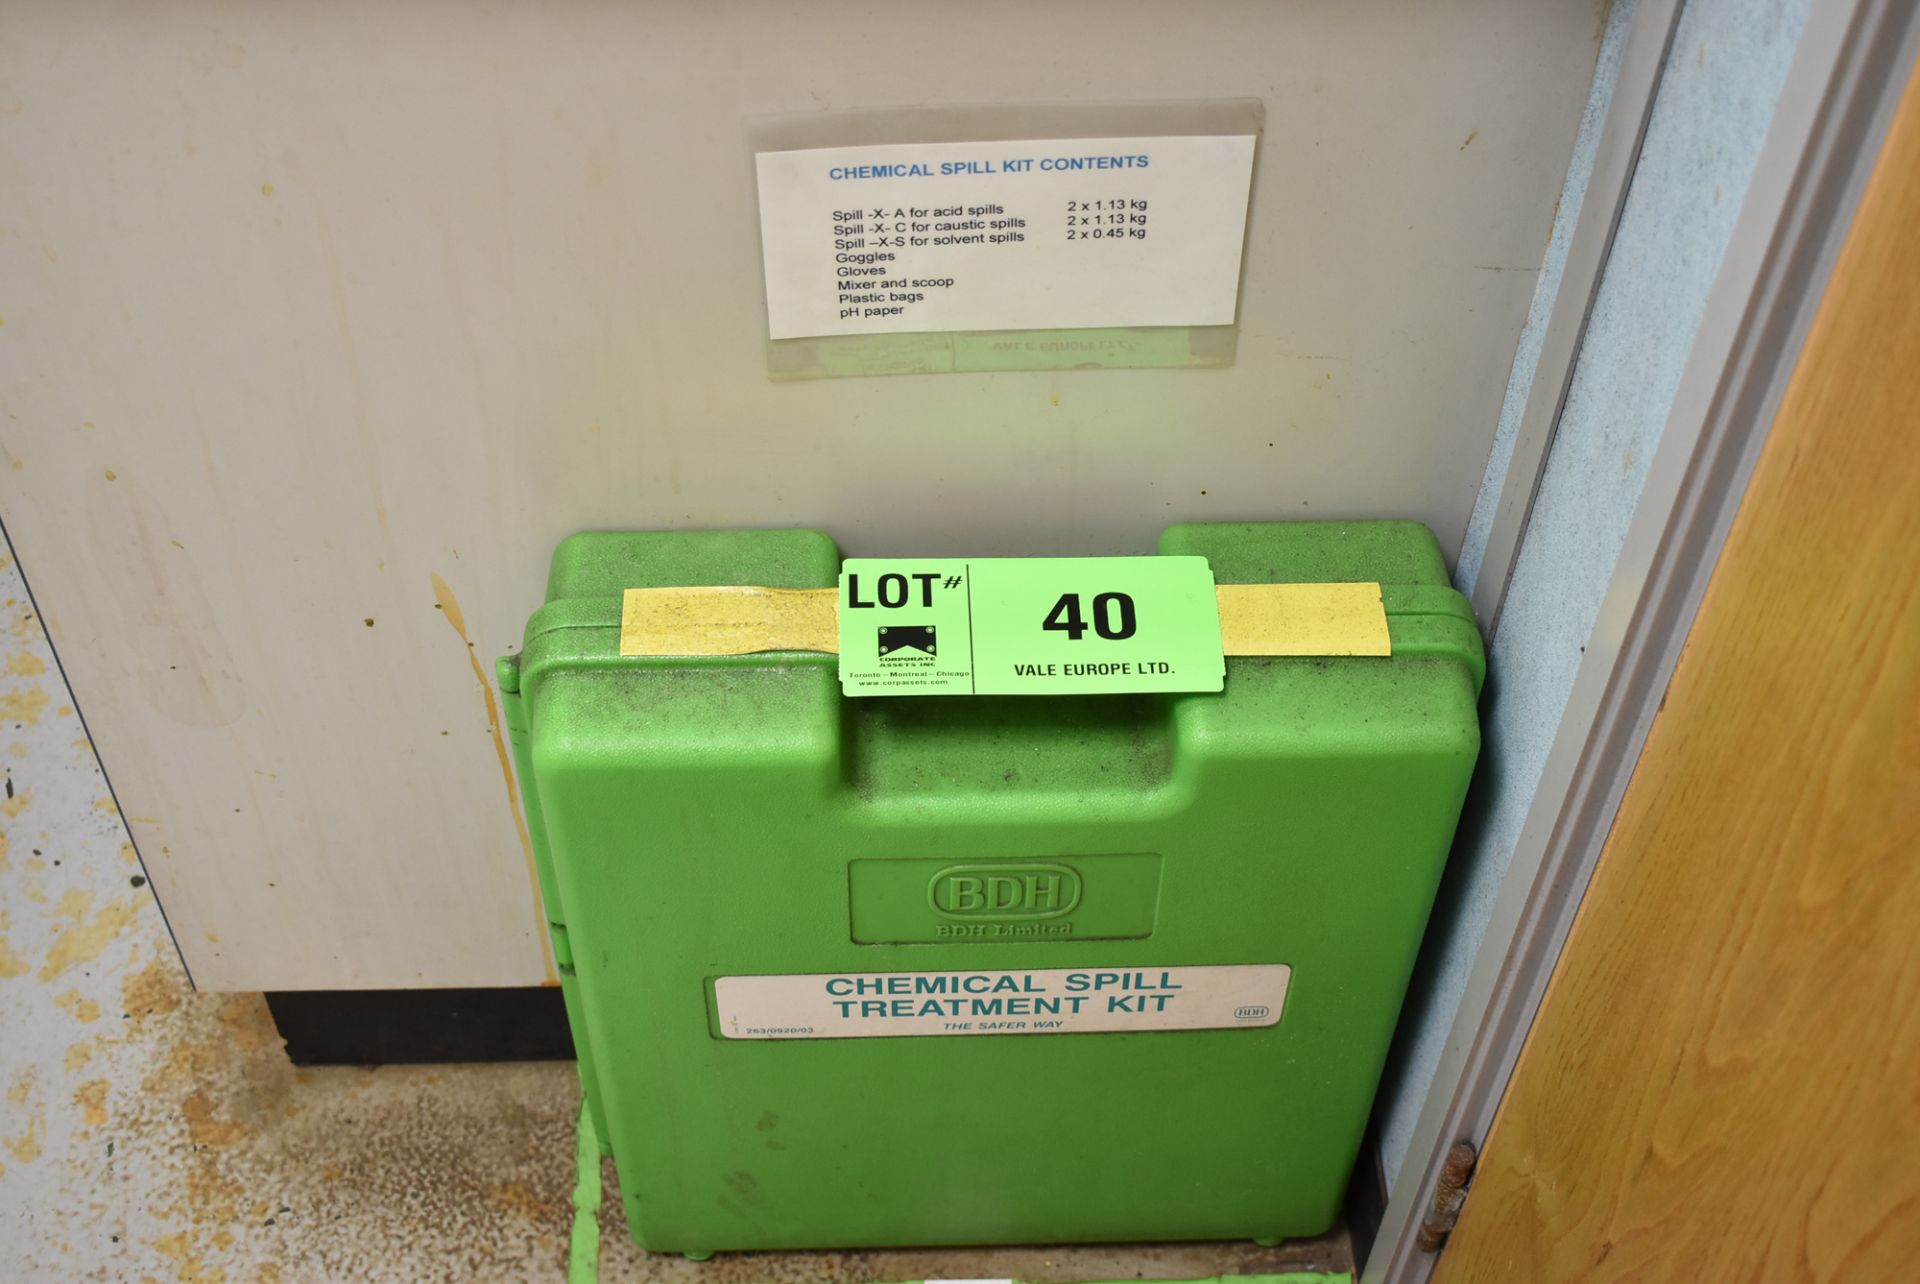 BDH EMERGENCY CHEMICAL SPILL TREATMENT KIT (ROOM 264D) [RIGGING FEES FOR LOT #40 - £35 PLUS